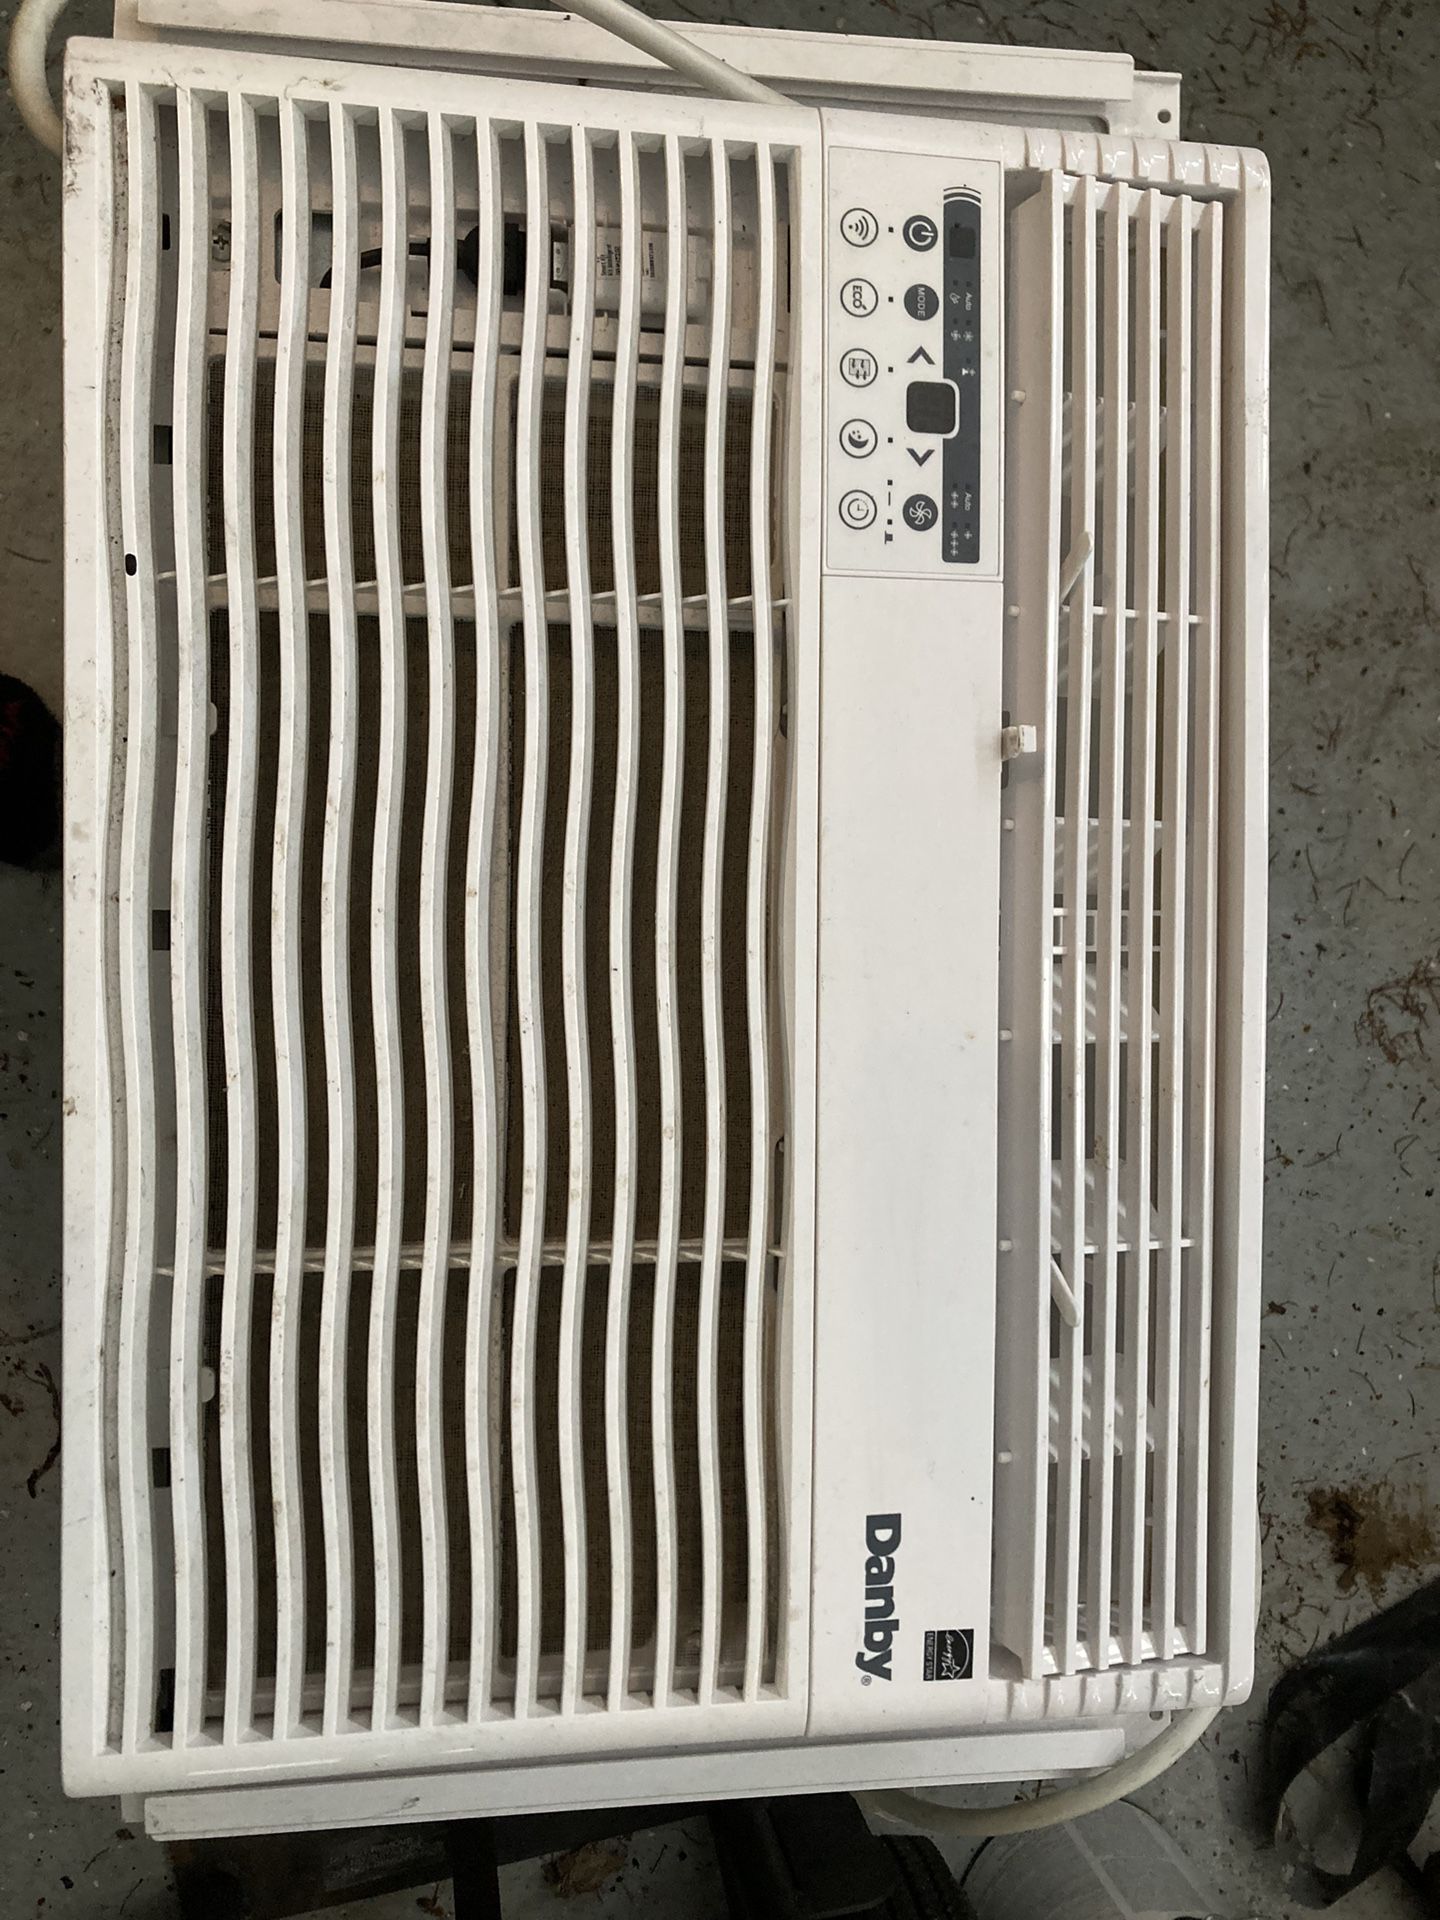 Danby 12,000 BTU Room Air Conditioner With Wireless Connect